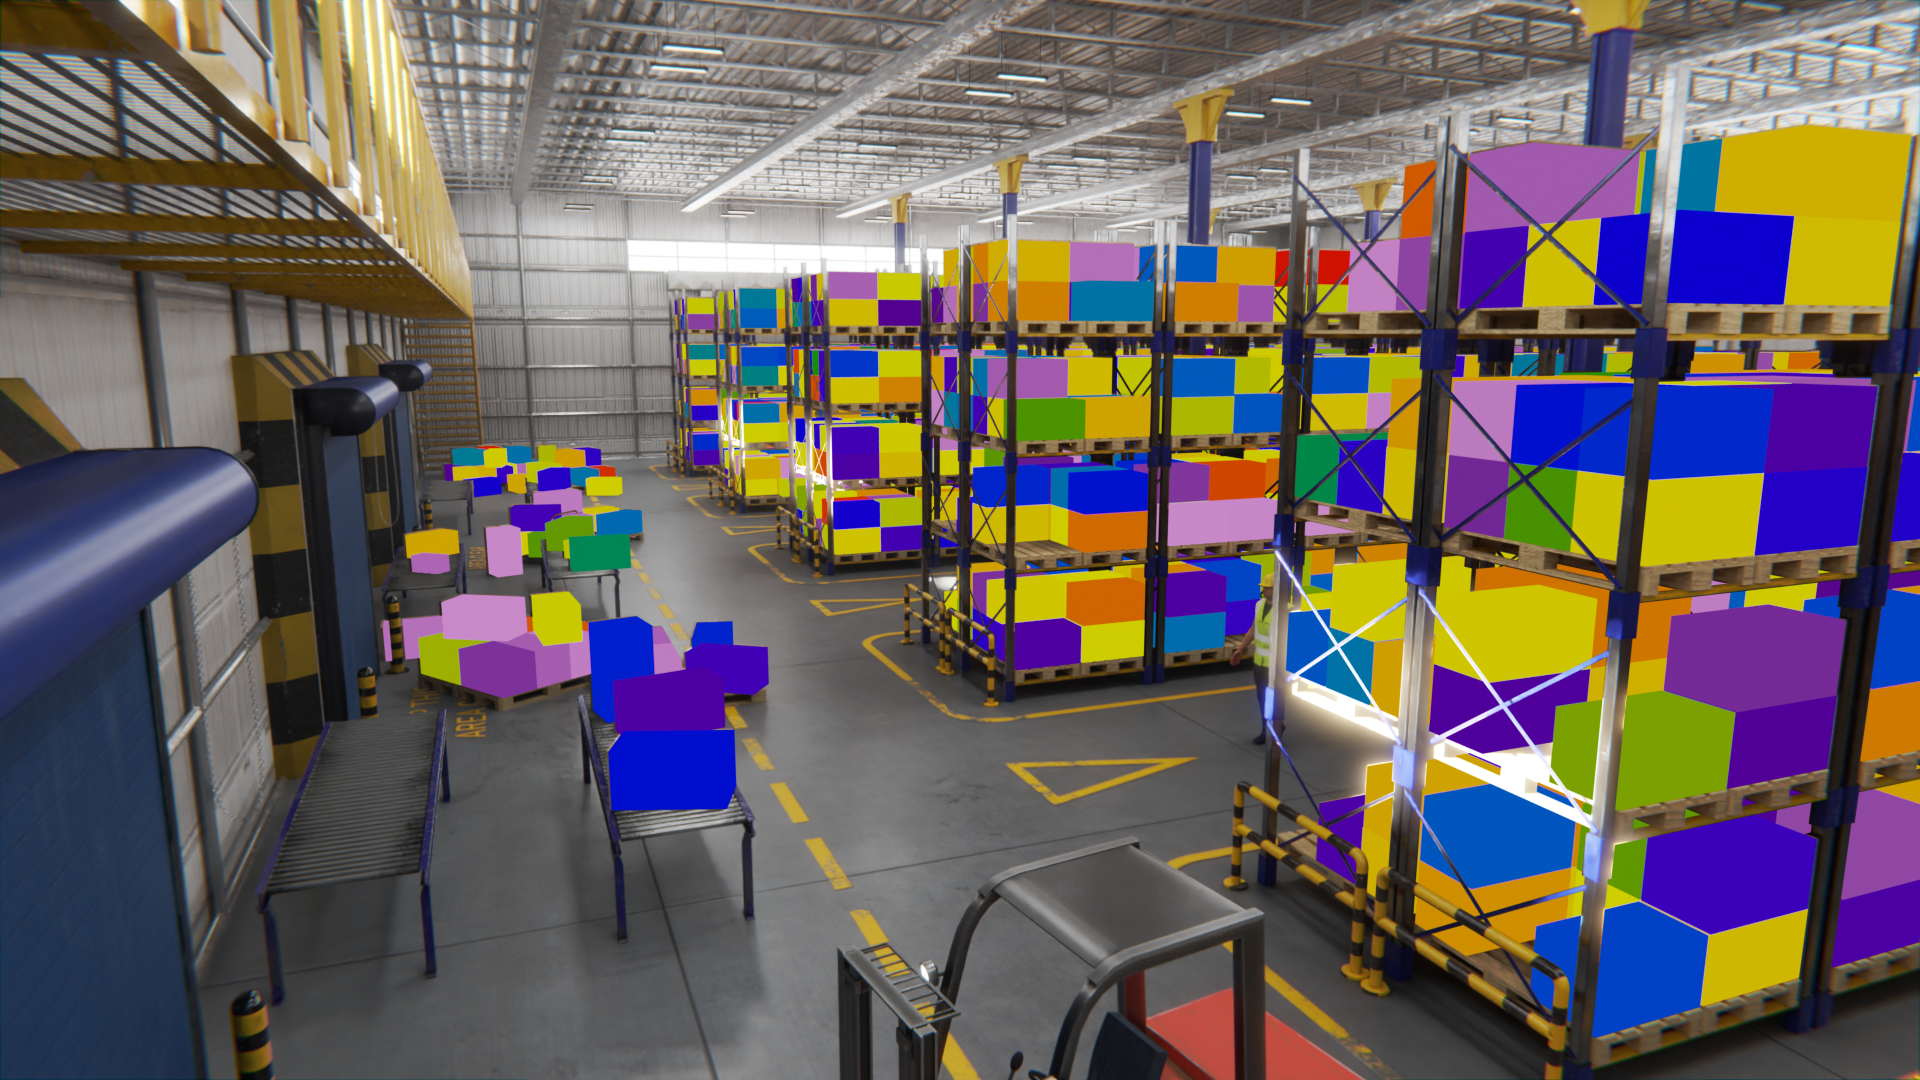 SKY ENGINE AI synthetic data simulation and generation and AI models training – Warehousing and inventorying in the grocery supply chain and logistics example